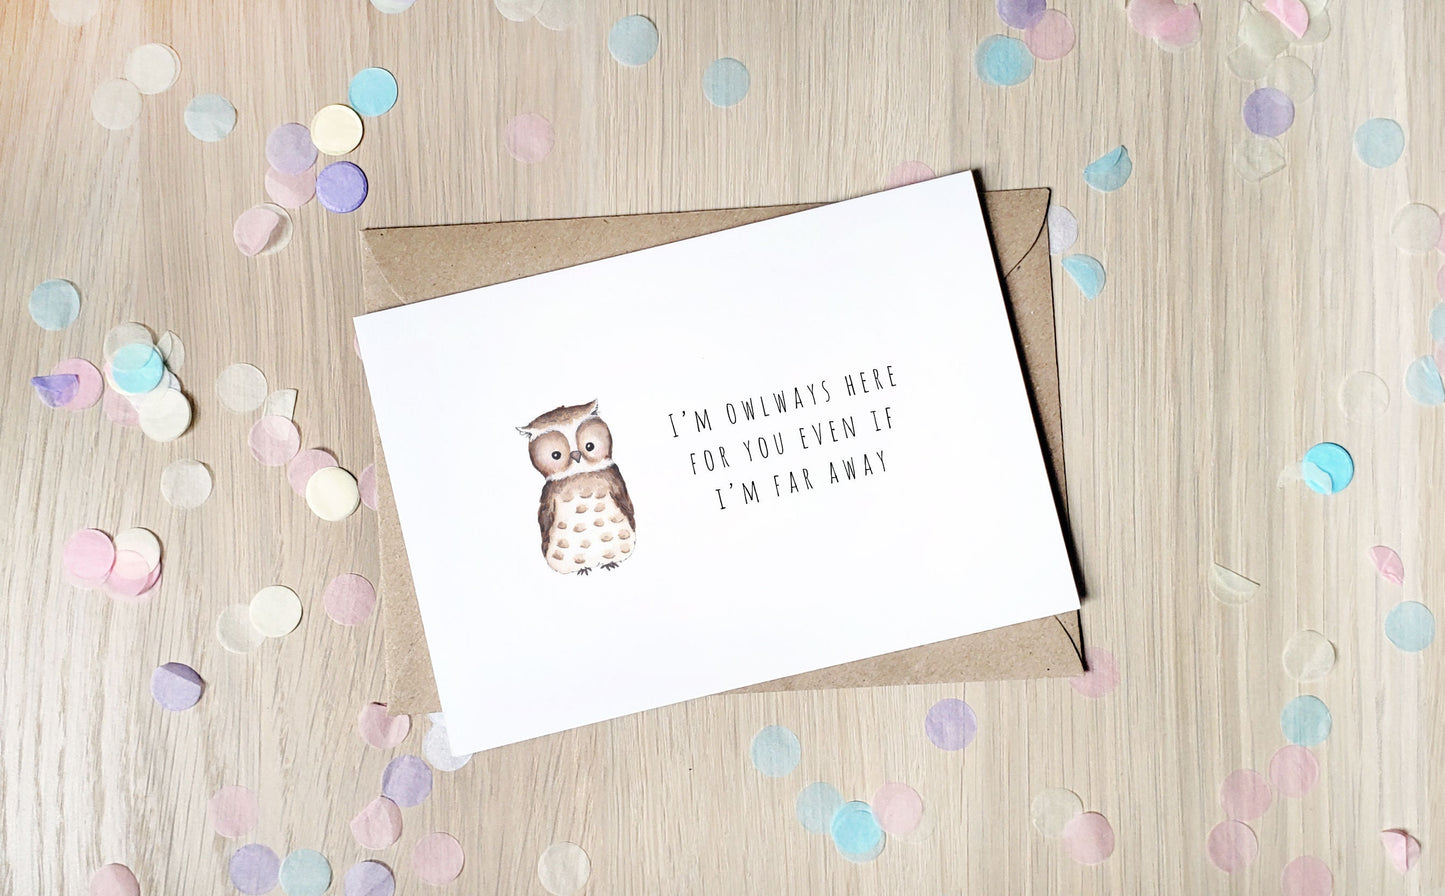 I will owlways be here for you - Greeting Card